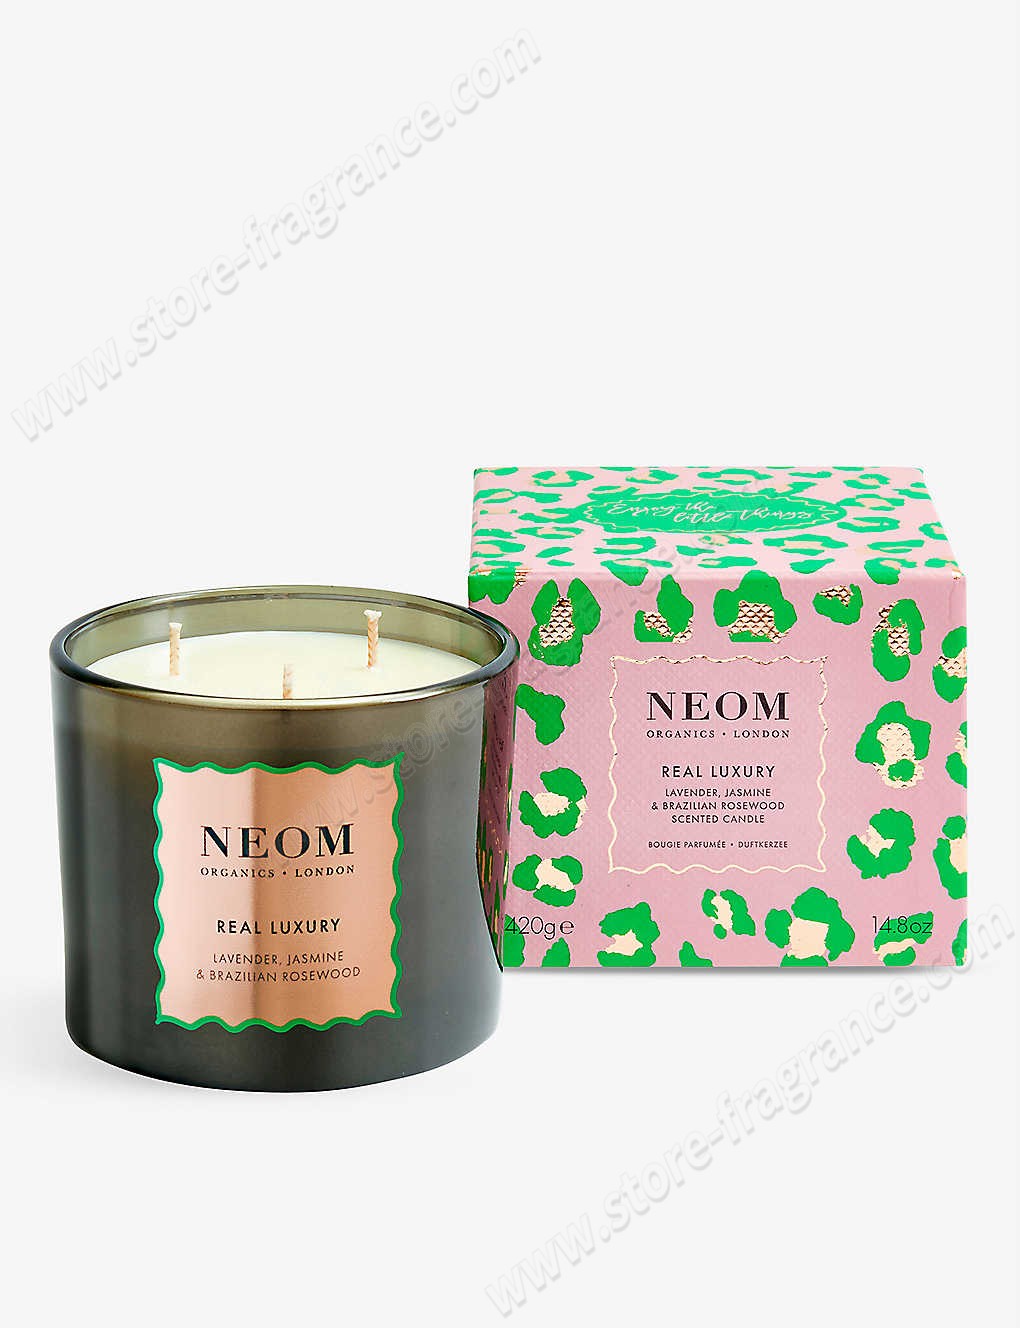 NEOM/Real Luxury™ scented candle 420g ✿ Discount Store - NEOM/Real Luxury™ scented candle 420g ✿ Discount Store